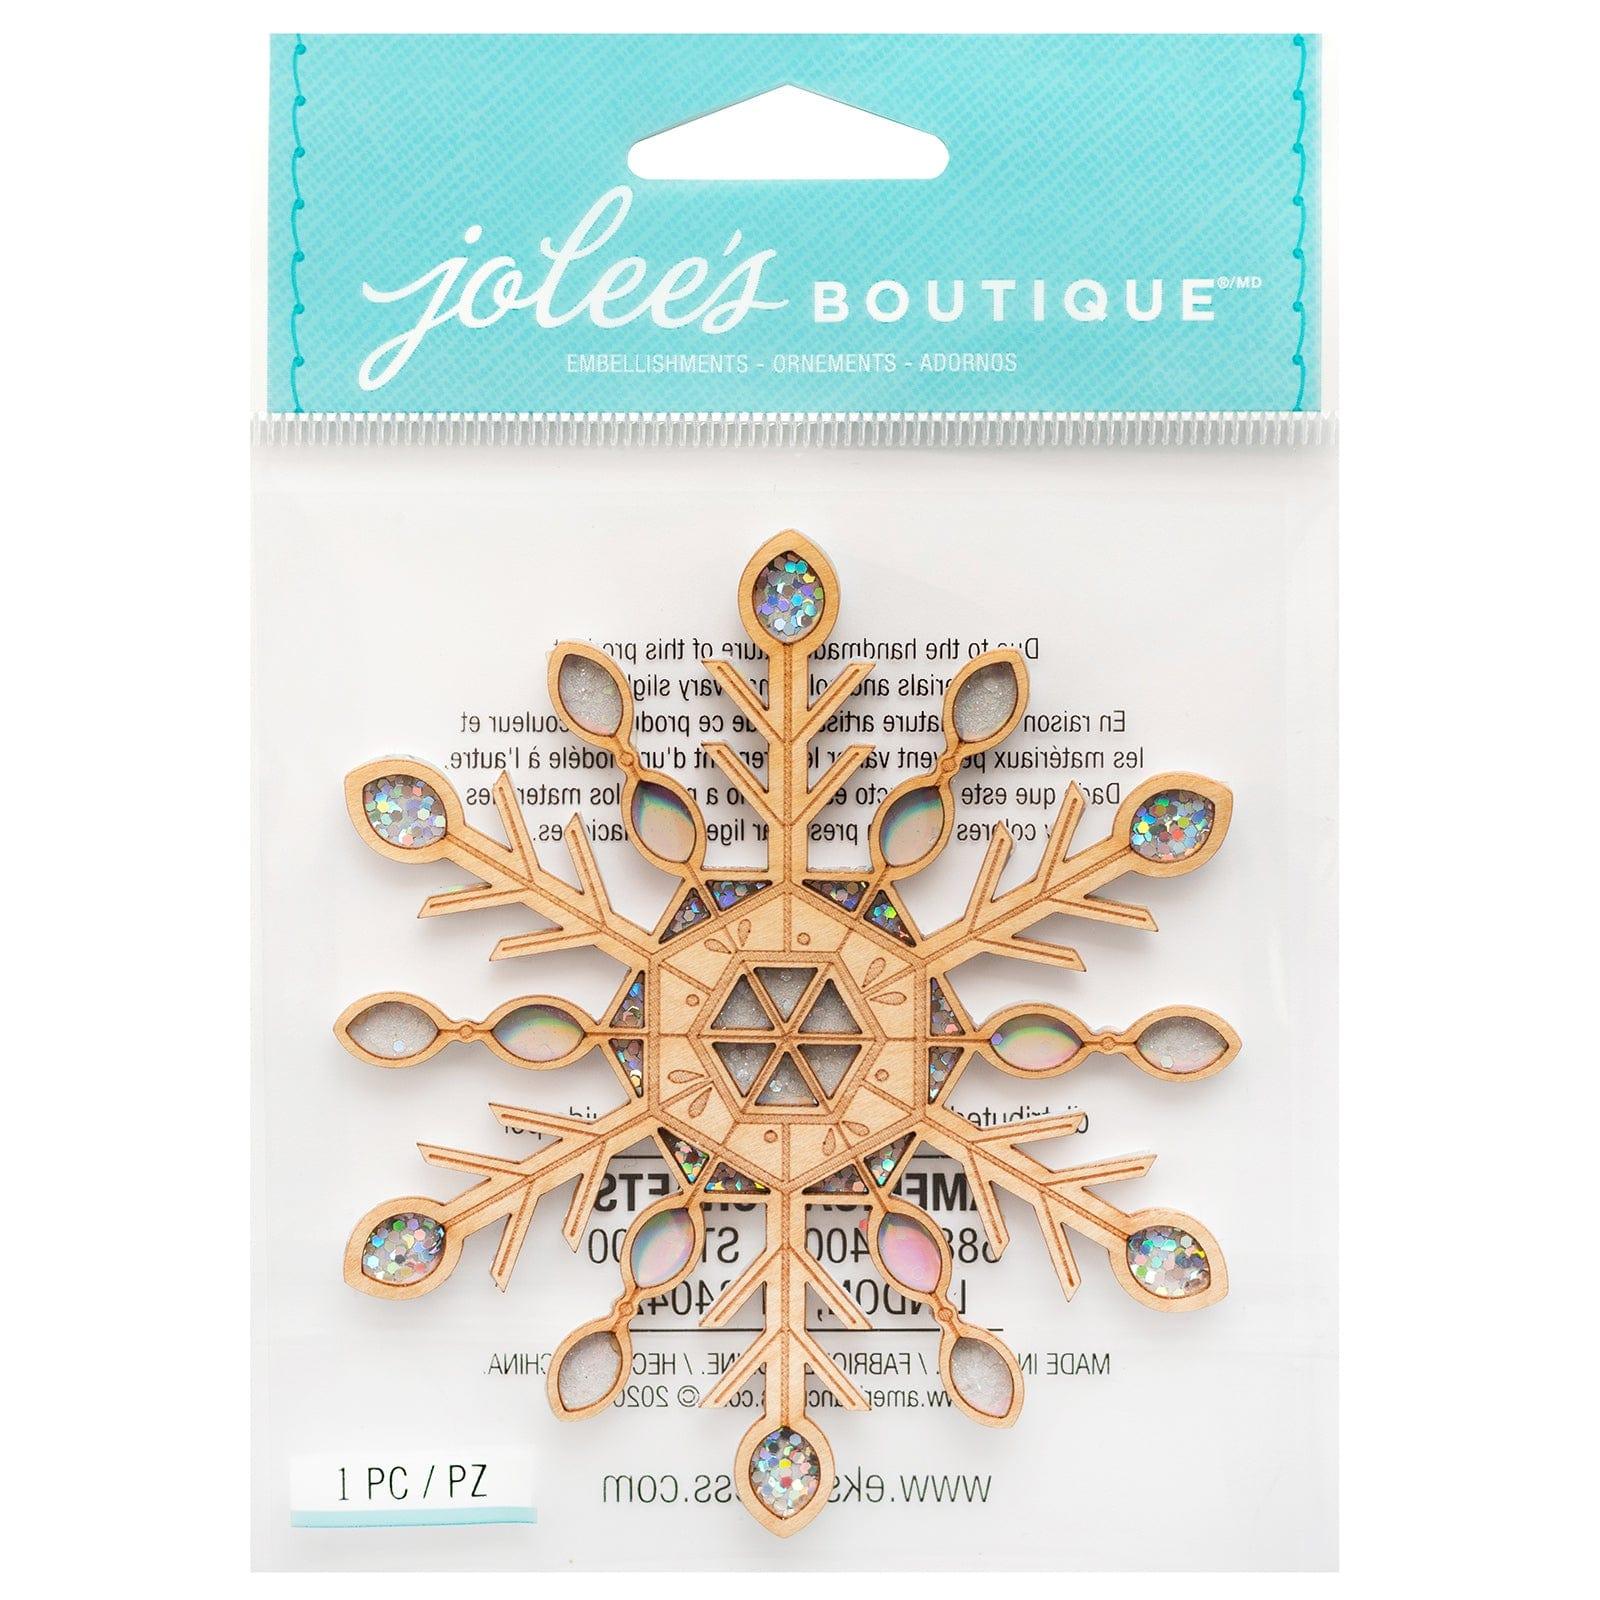 Wood Collection Snowflake 4 x 4.5 Scrapbook Embellishment by Jolee's Boutique - Scrapbook Supply Companies